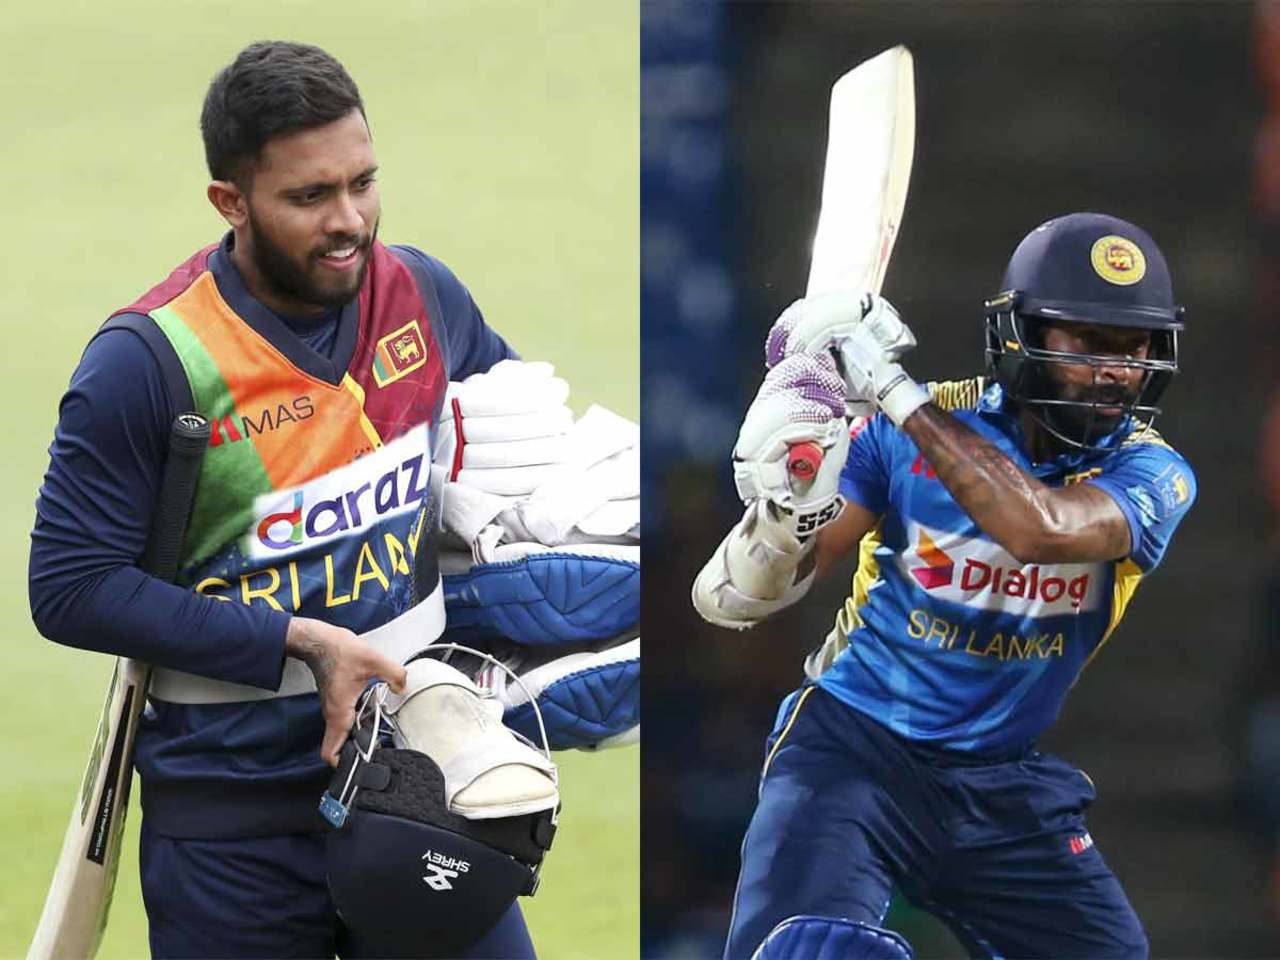 Sri Lanka Fans Unfollow Cricketers After Drubbing Against England